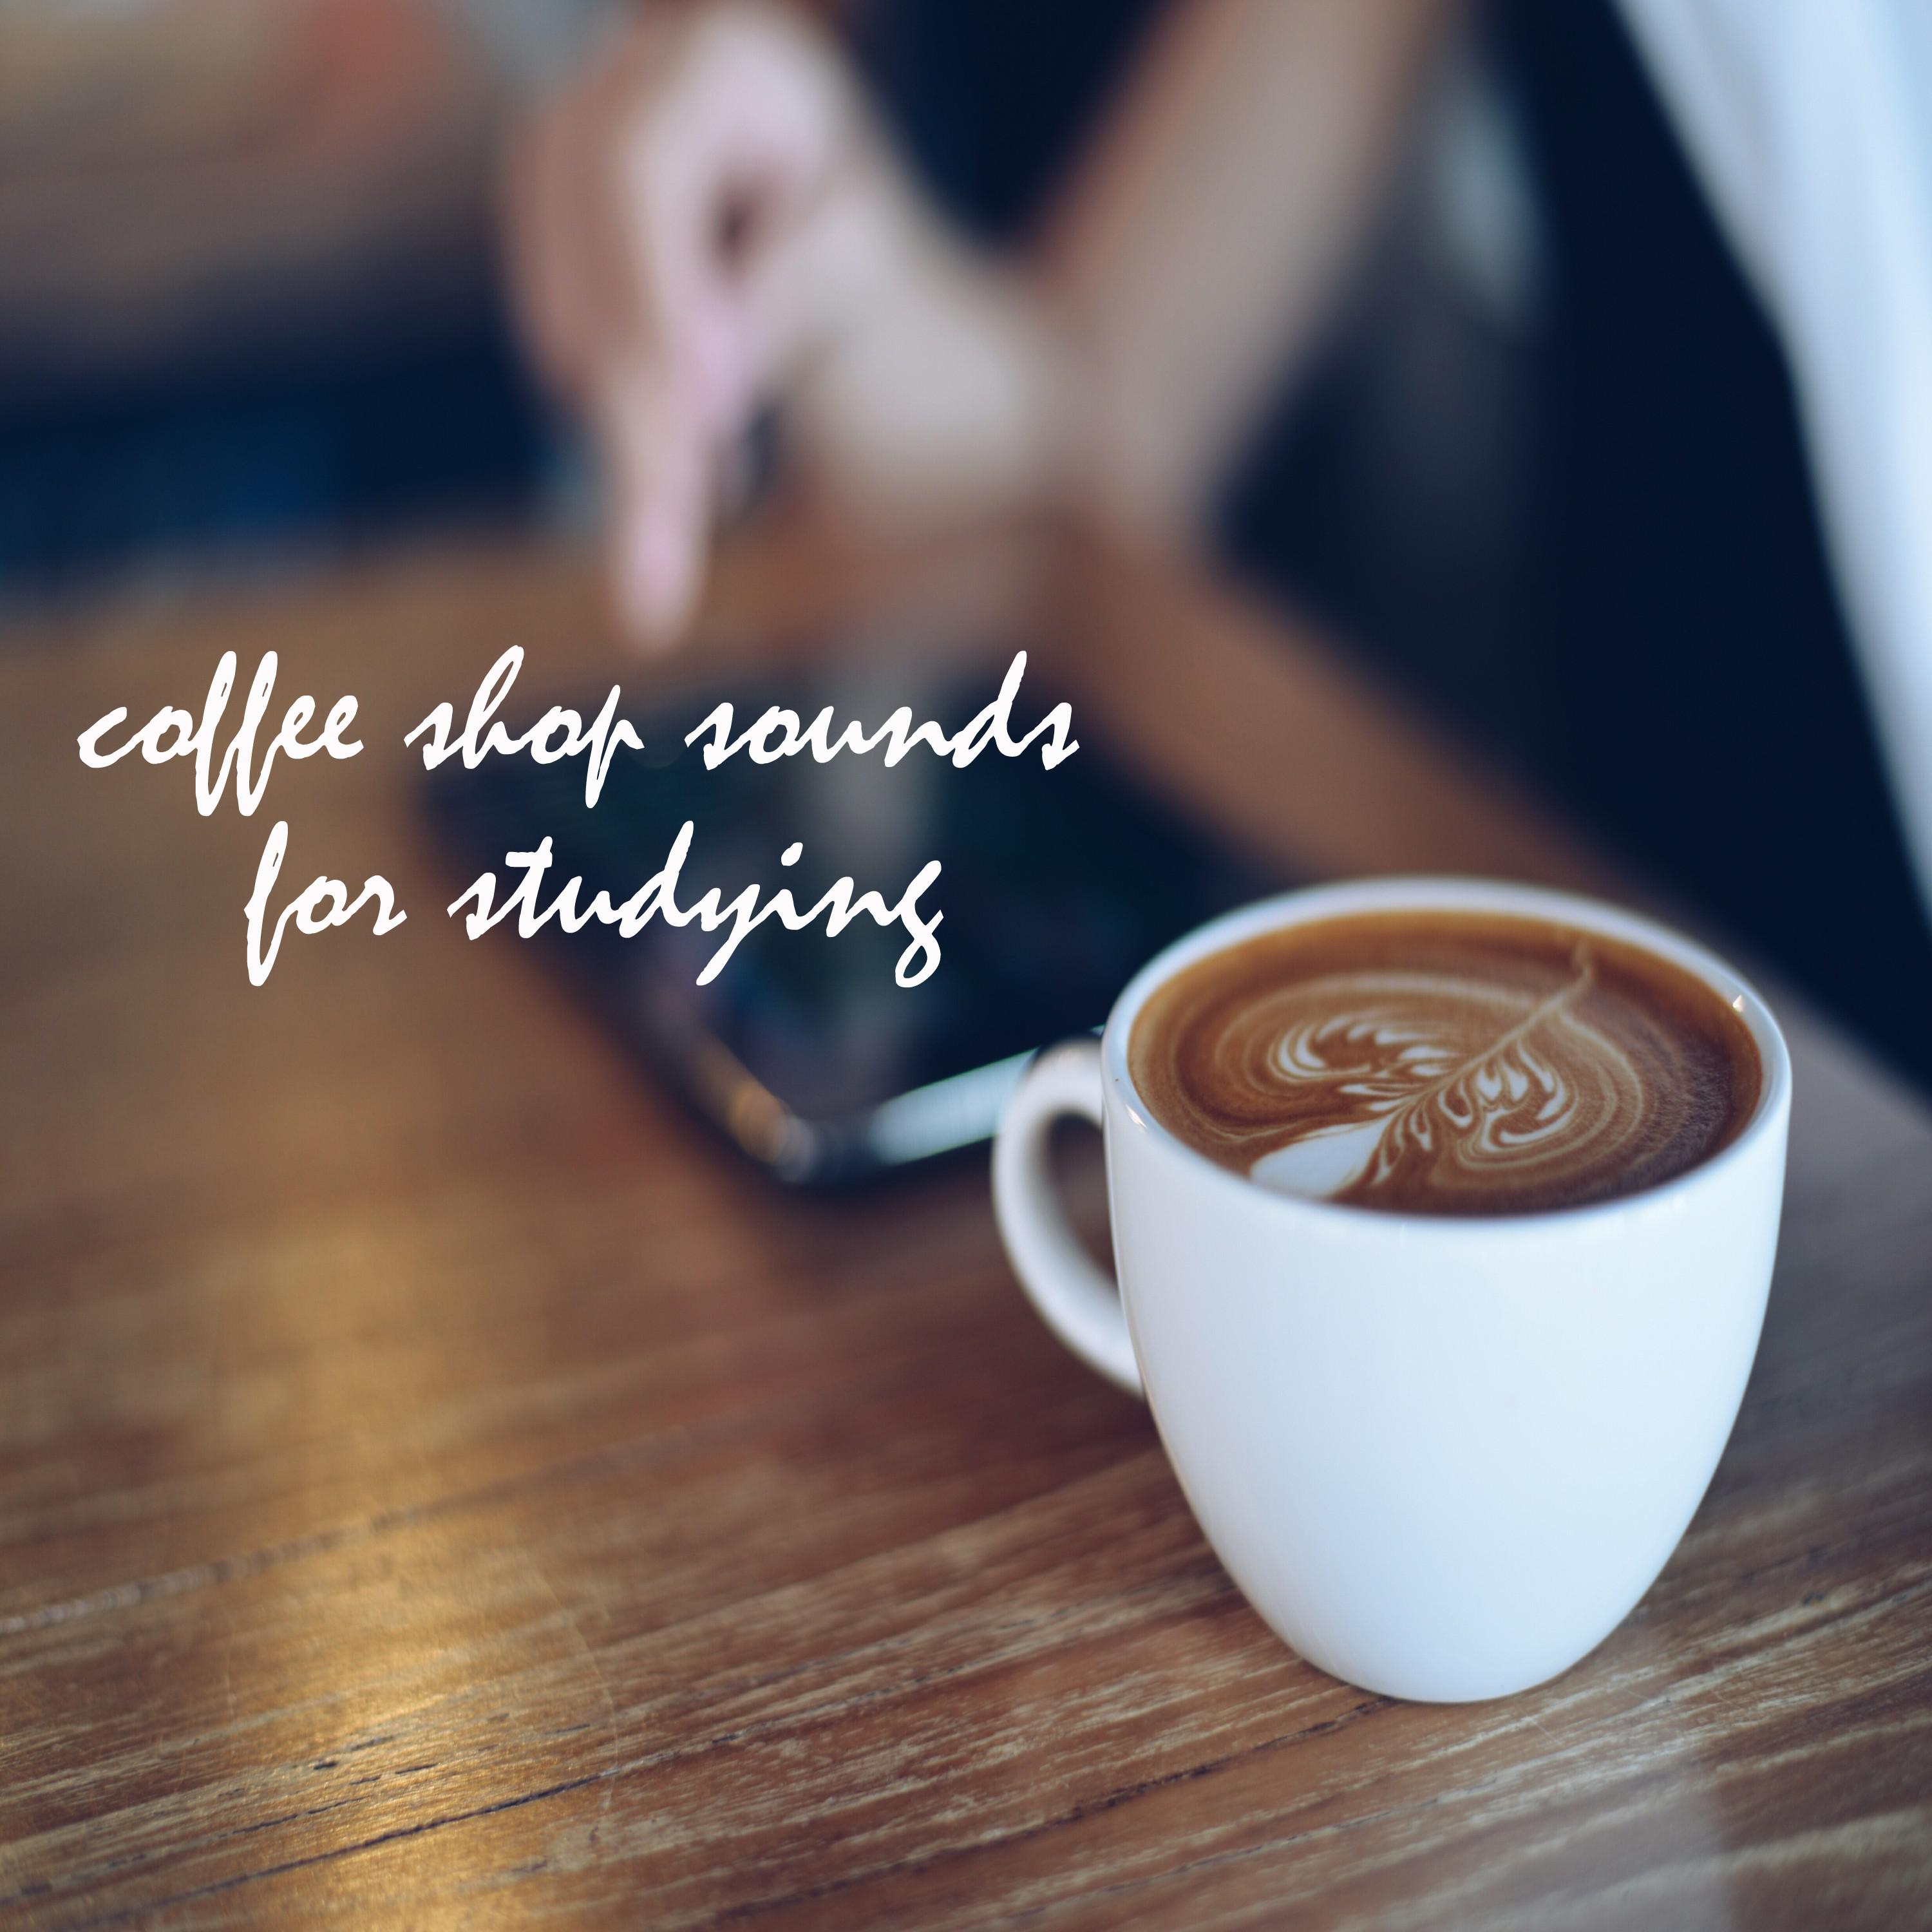 Coffee Shop Sounds for Studying and Working, Pt. 58